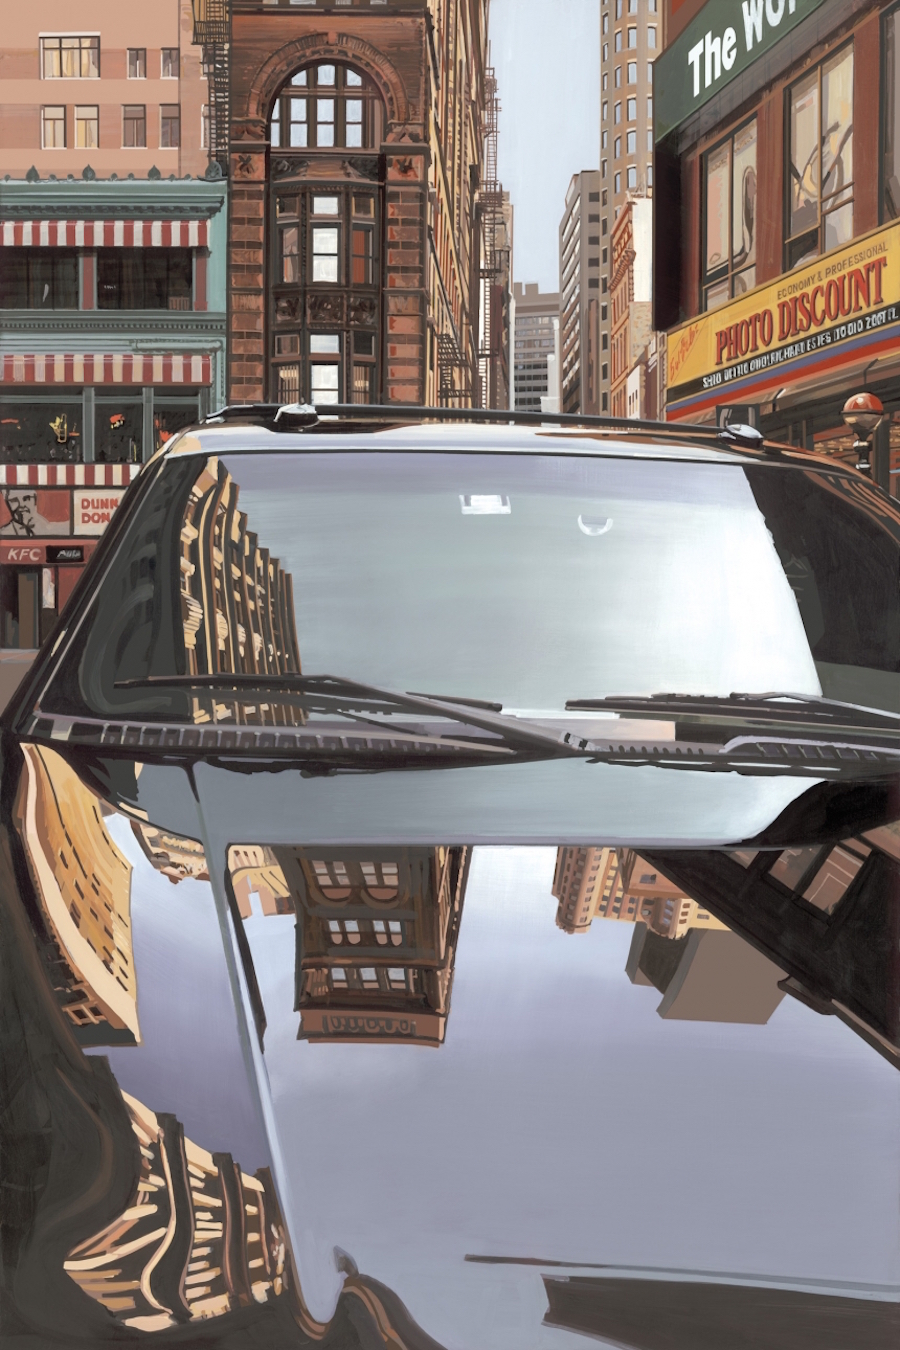 Great Photorealistic Paintings of NYC3